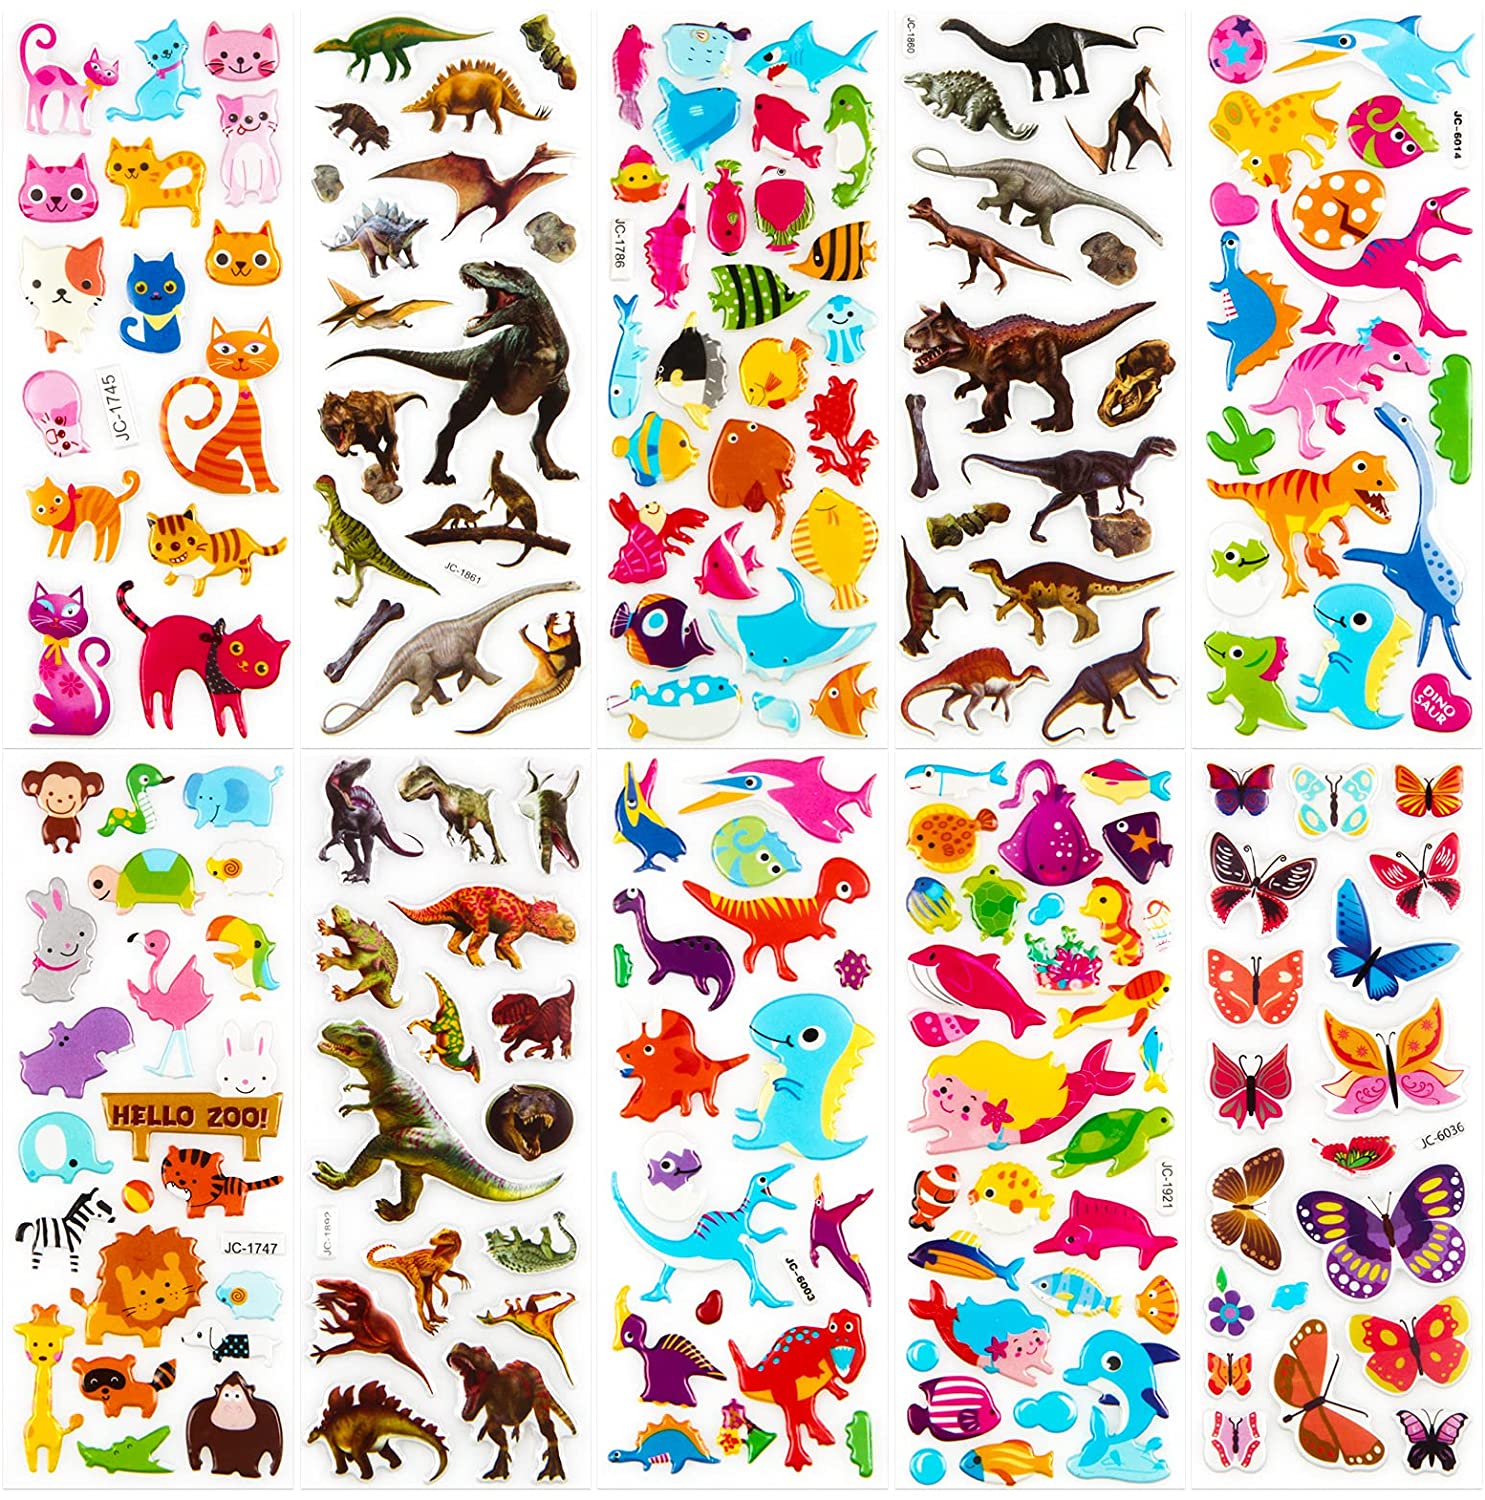 Puffy Sticker Producer To Make Animal Puffy Stickers For Kids 52 Sheets 3D Stickers Pack For Children Over 1100 Stickers For Boys Girls And Toddler, Included Animals Butterfly Dinosaur Ocean Life